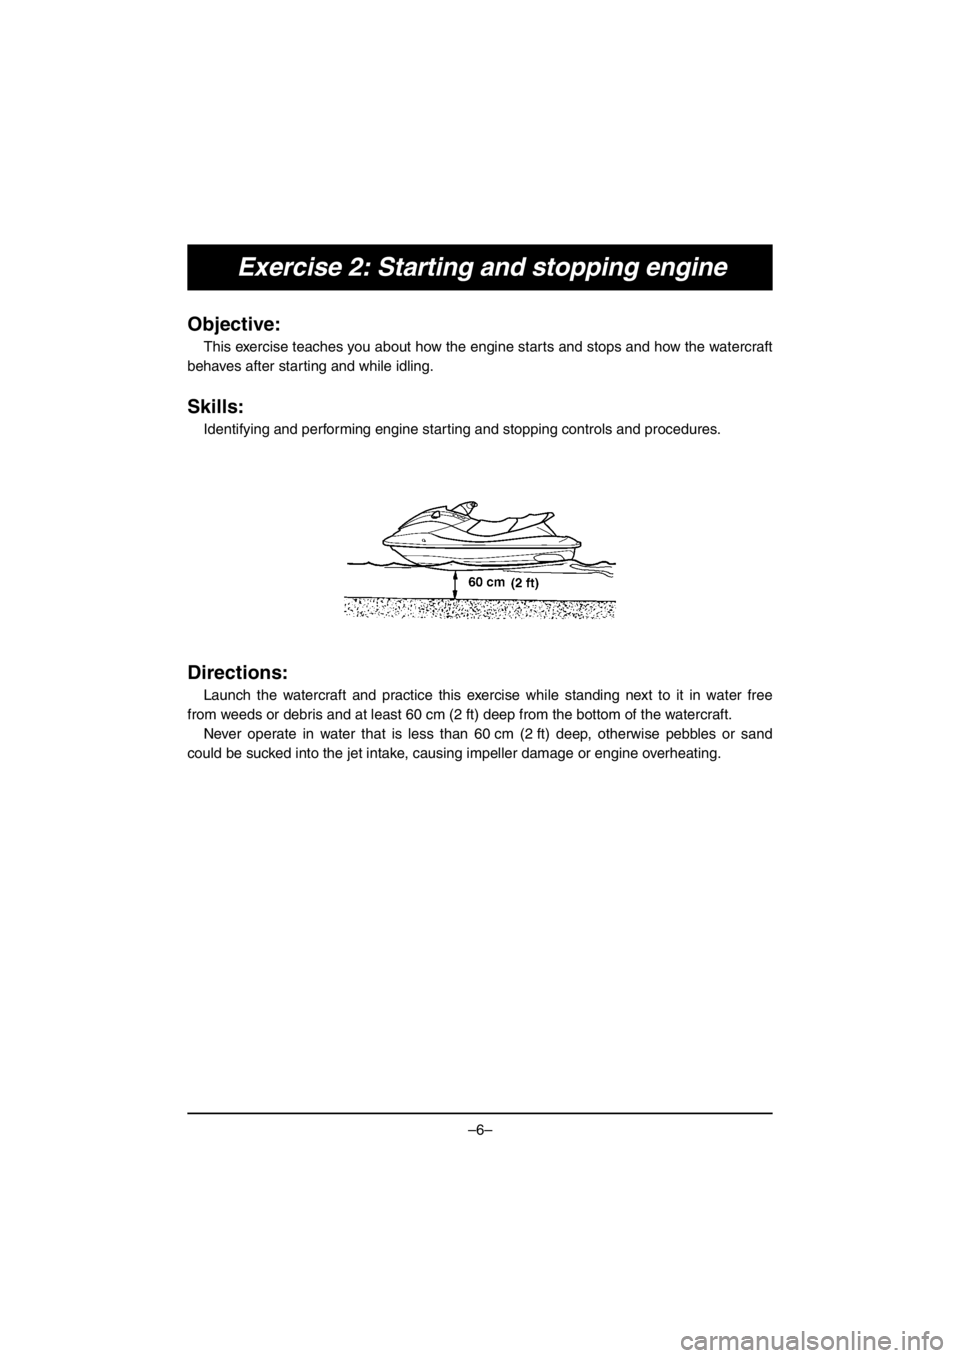 YAMAHA V1 2016  Owners Manual –6–
Exercise 2: Starting and stopping engine
Objective:
This exercise teaches you about how the engine starts and stops and how the watercraft
behaves after starting and while idling.
Skills:
Iden